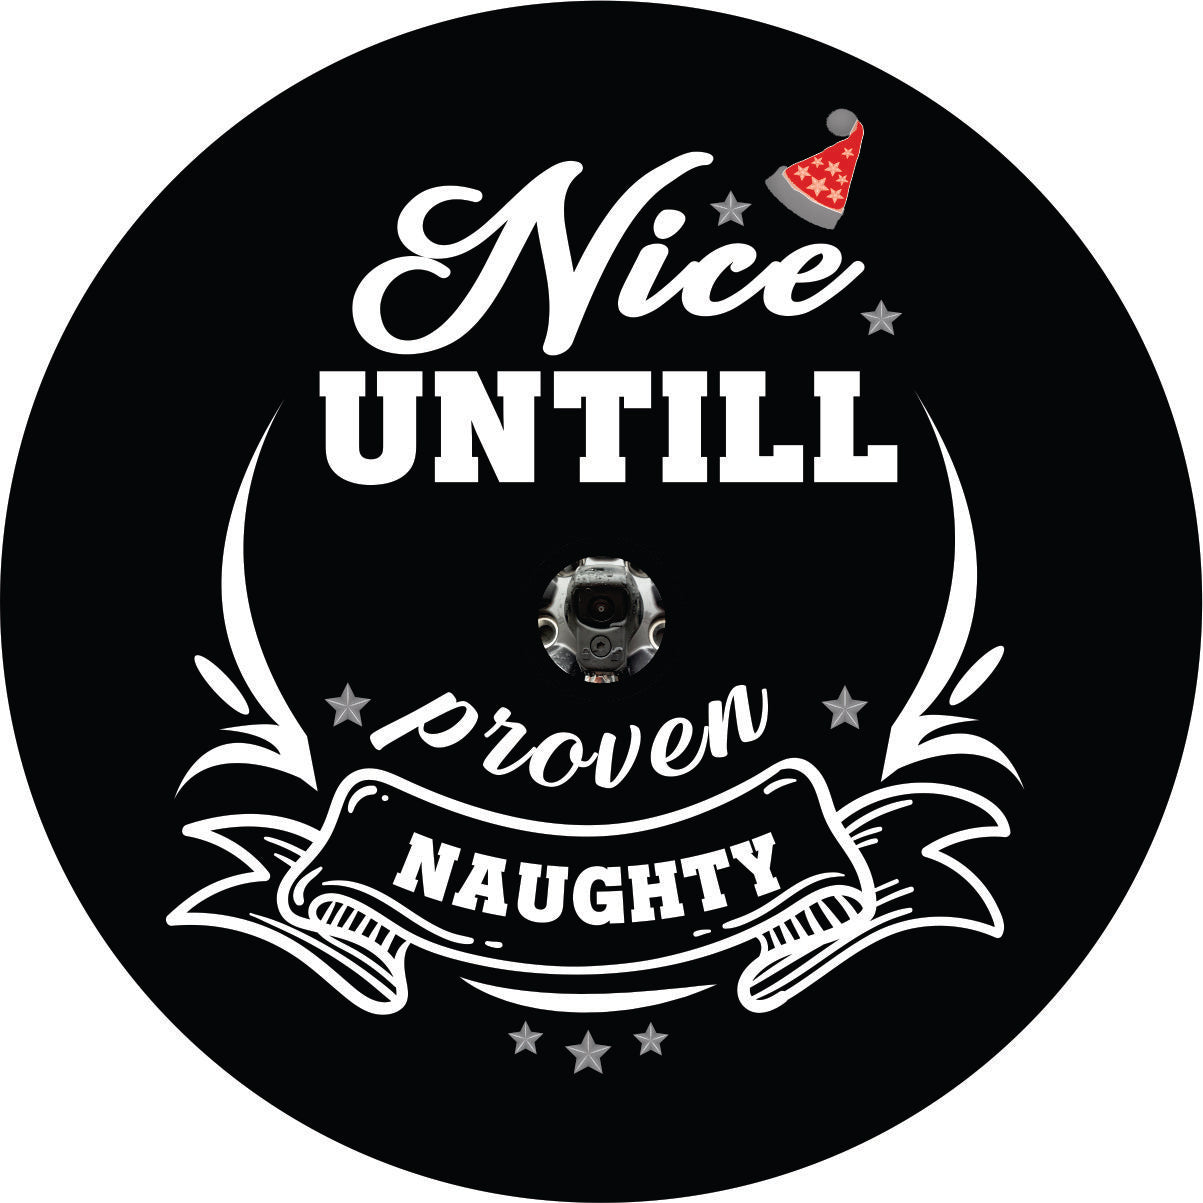 Cute and creative Christmas spare tire cover design for any vehicle spare tire cover. Funny saying, nice until proven naughty in creative typography with spacing for a spare tire cover with a back up camera 